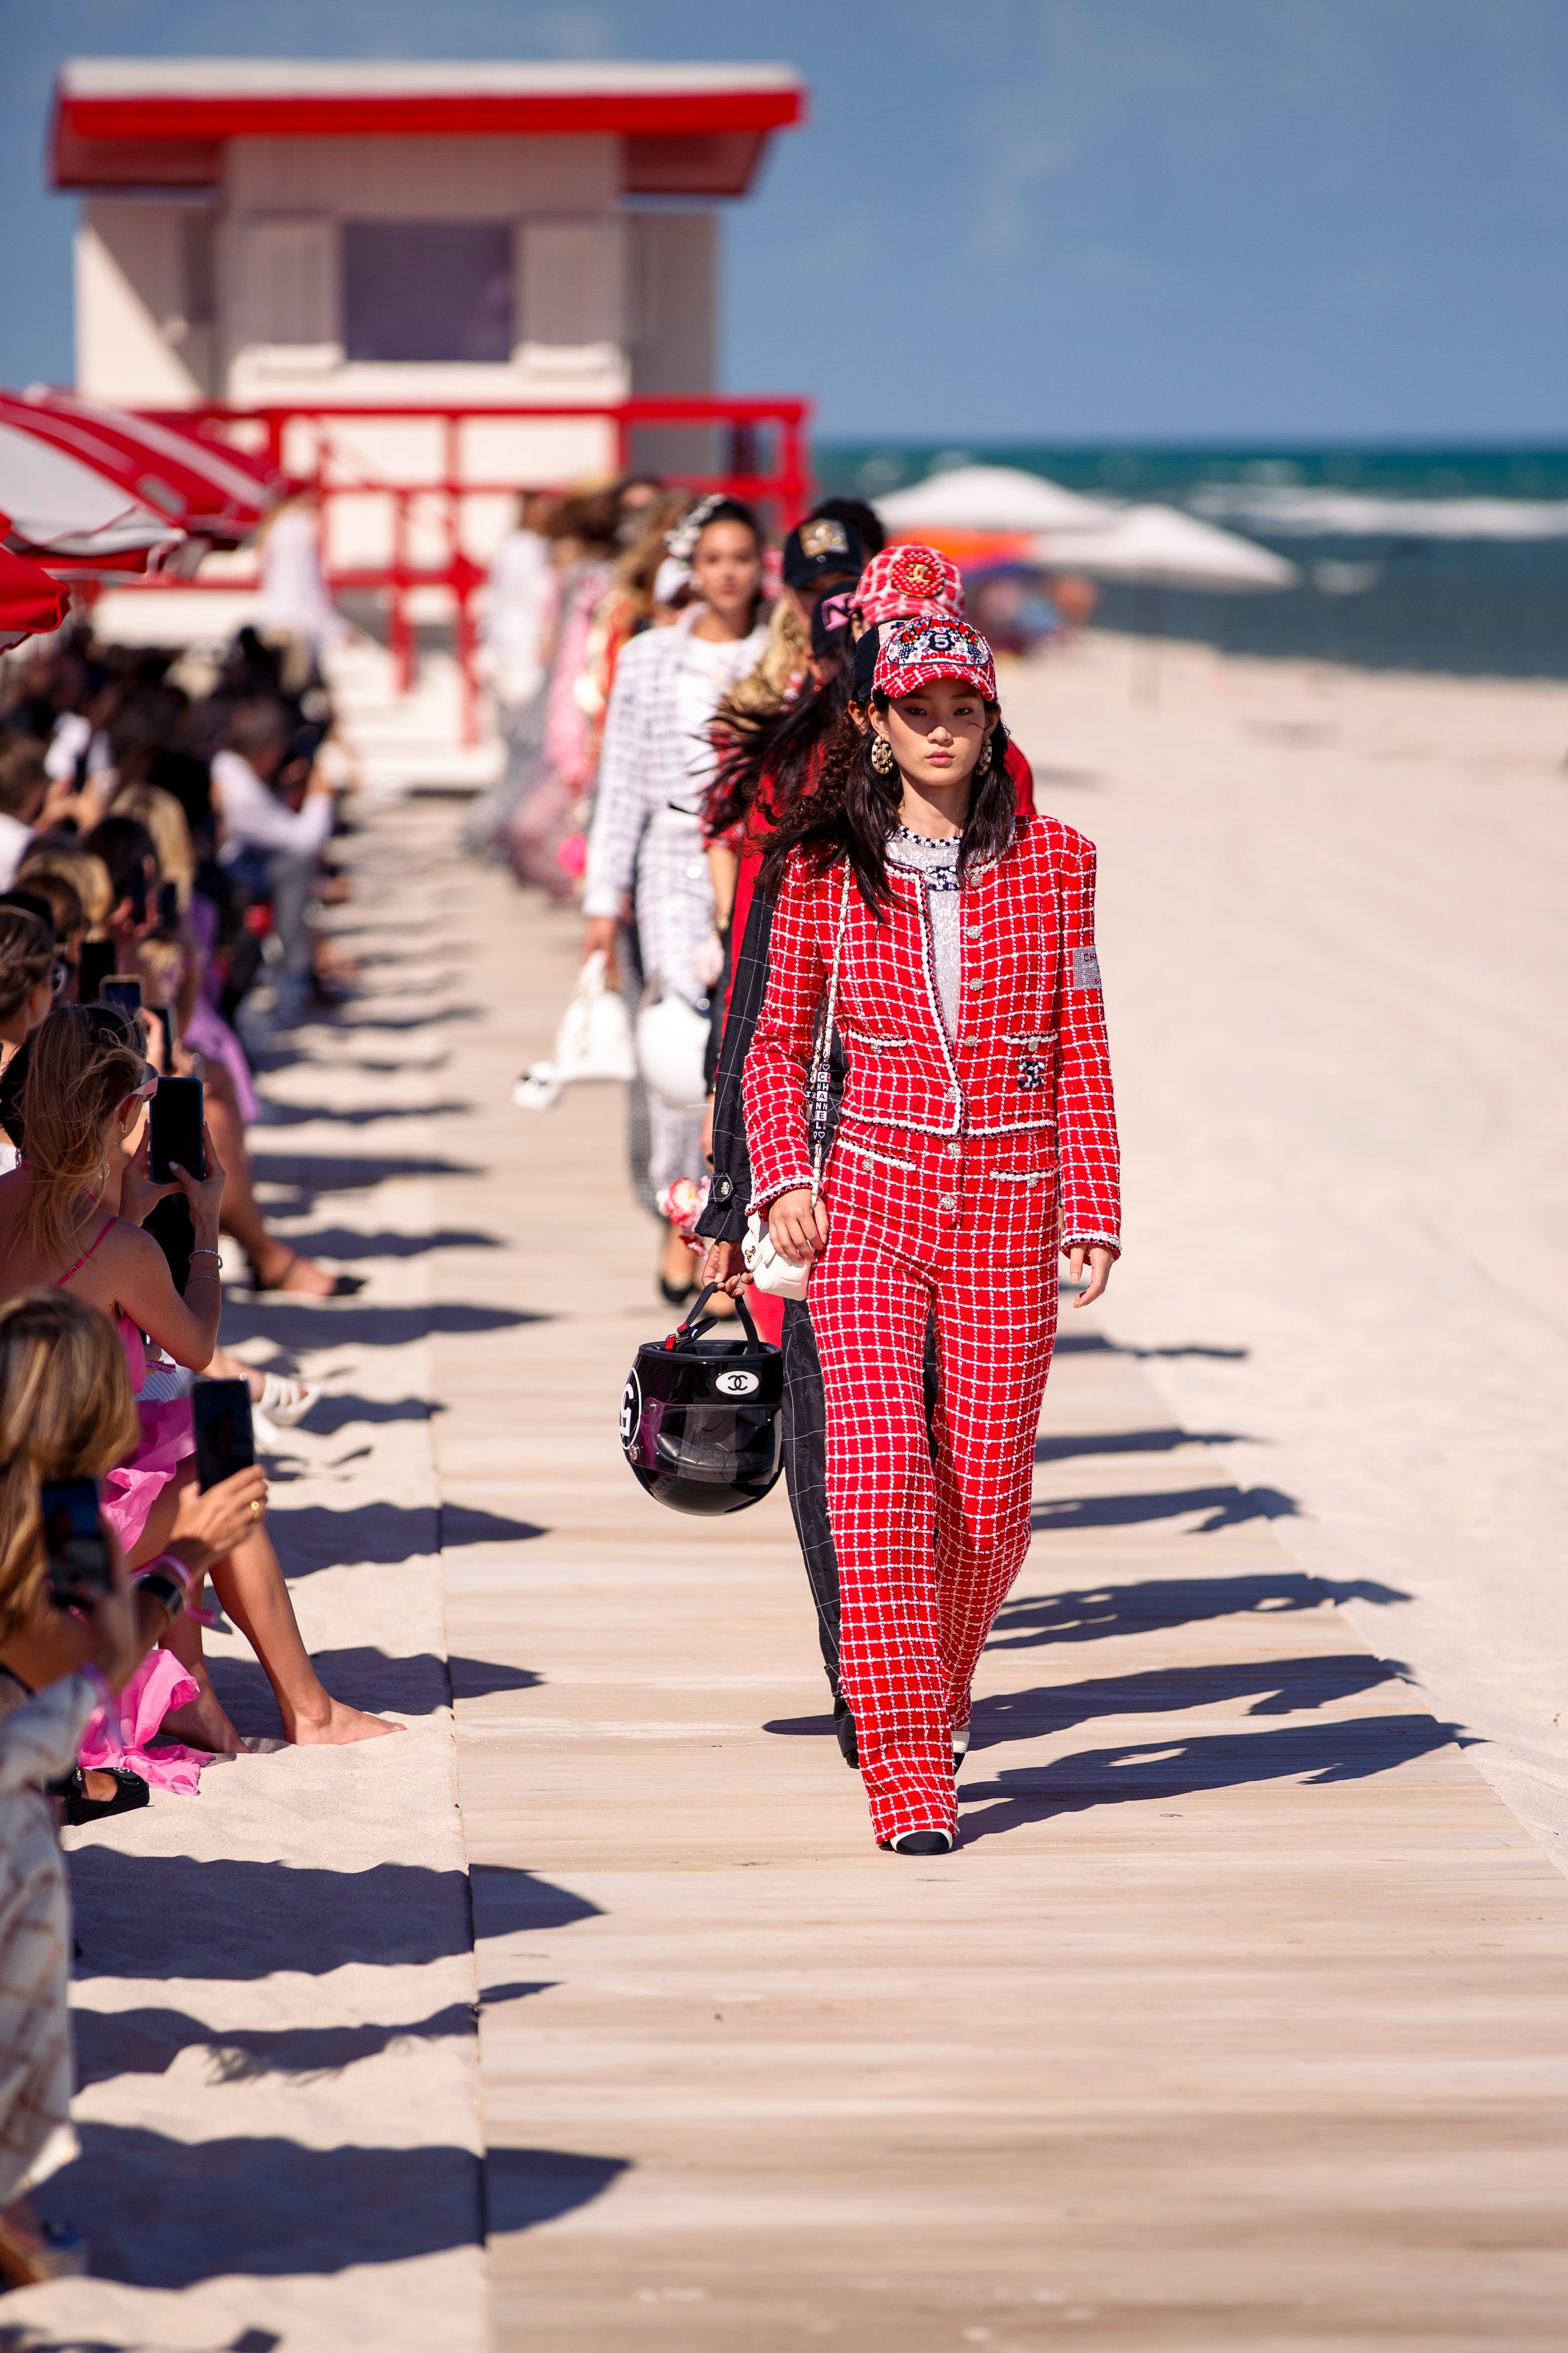 Chanel's Cruise Collection Show Was Full of Great Celebrity Outfits